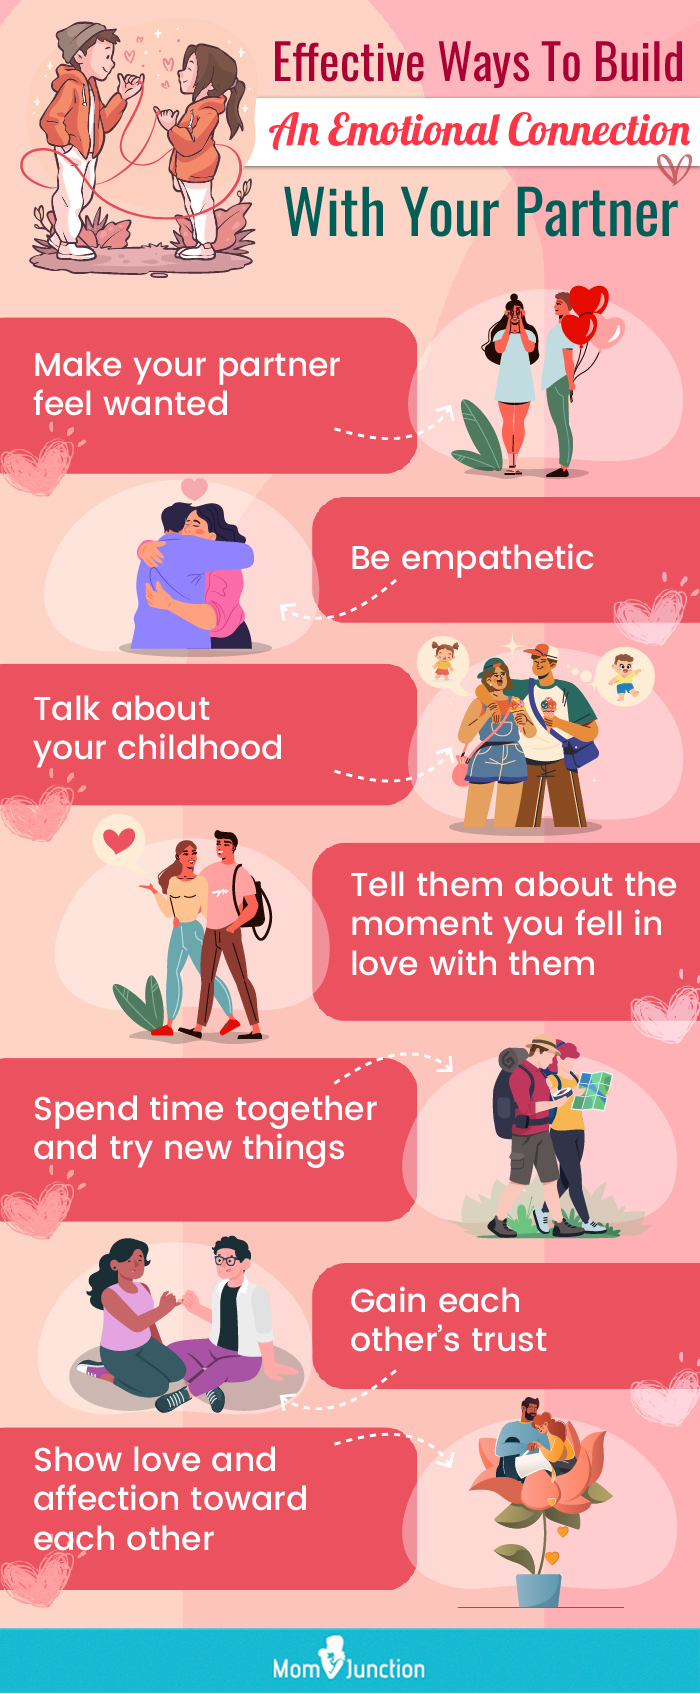 How To Build An Emotional Connection With Your Partner?